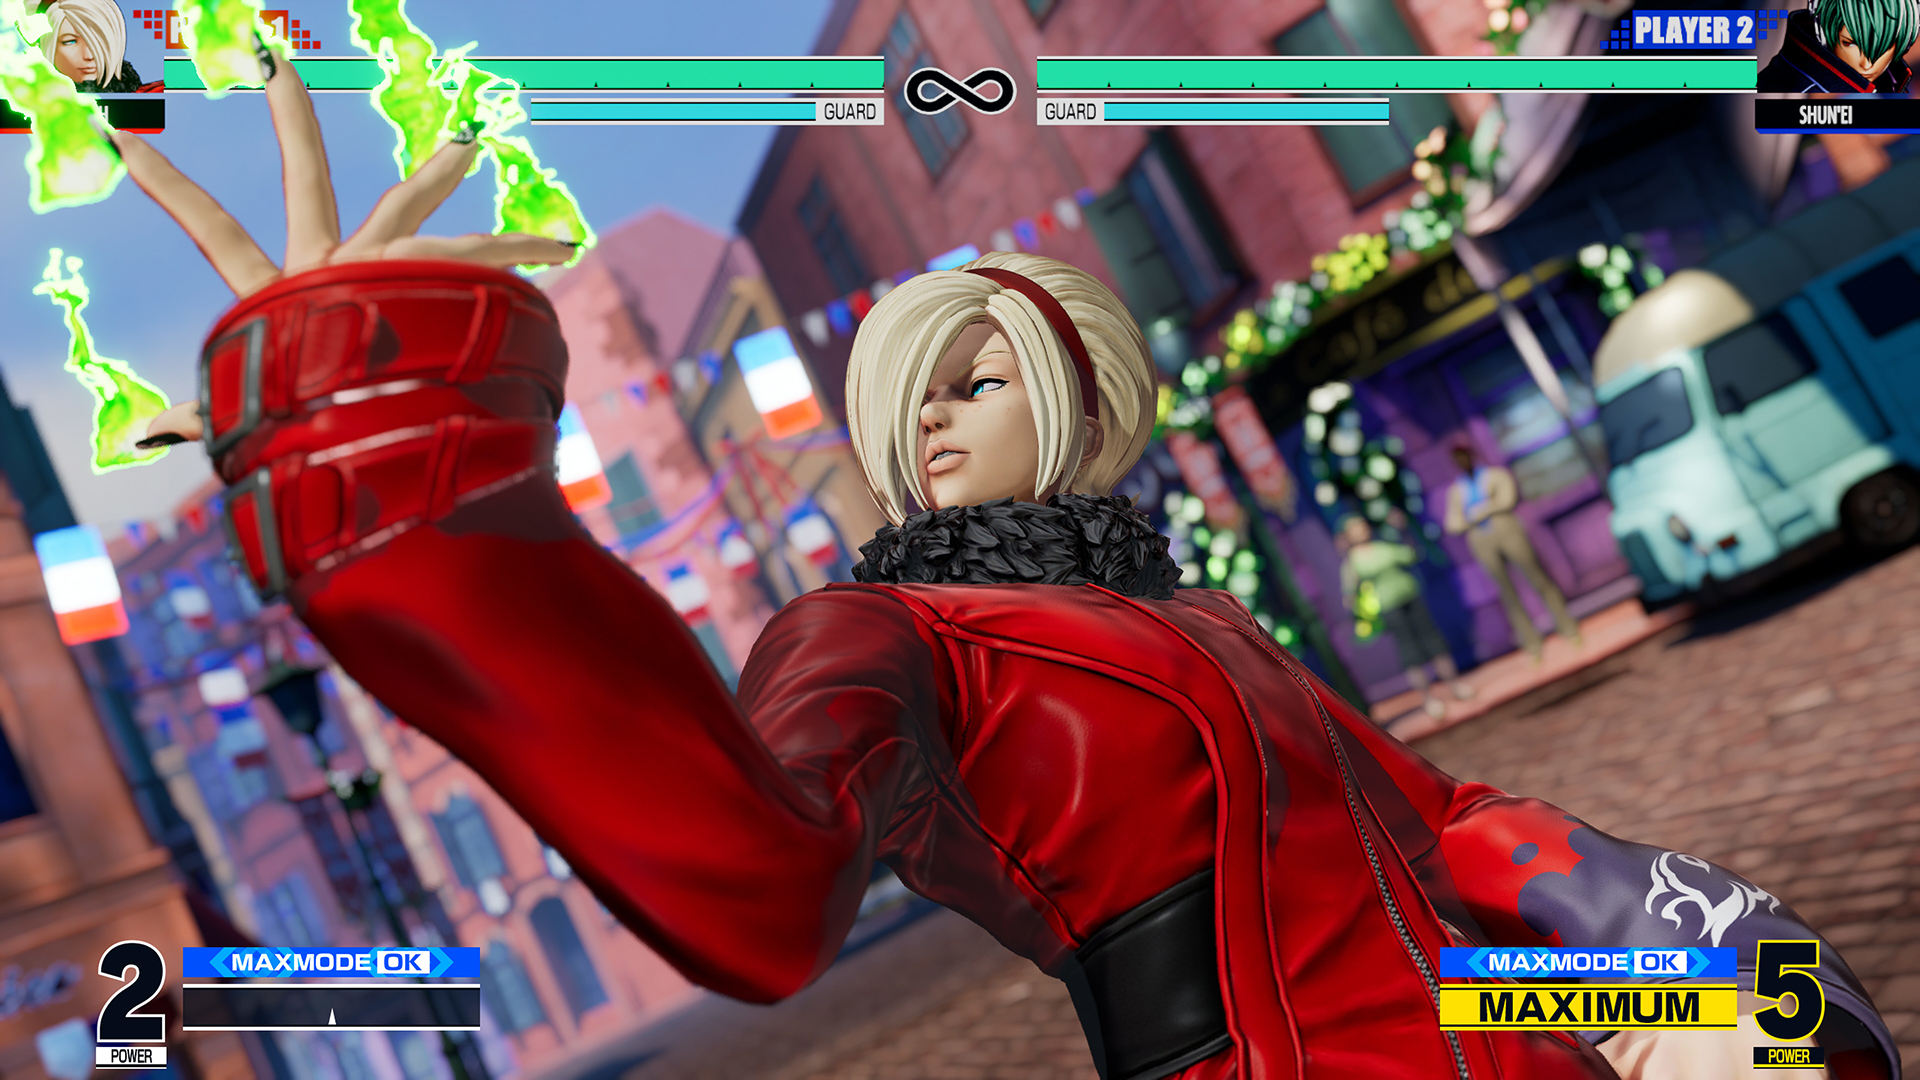 Jogo The King Of Fighters XV para PS4